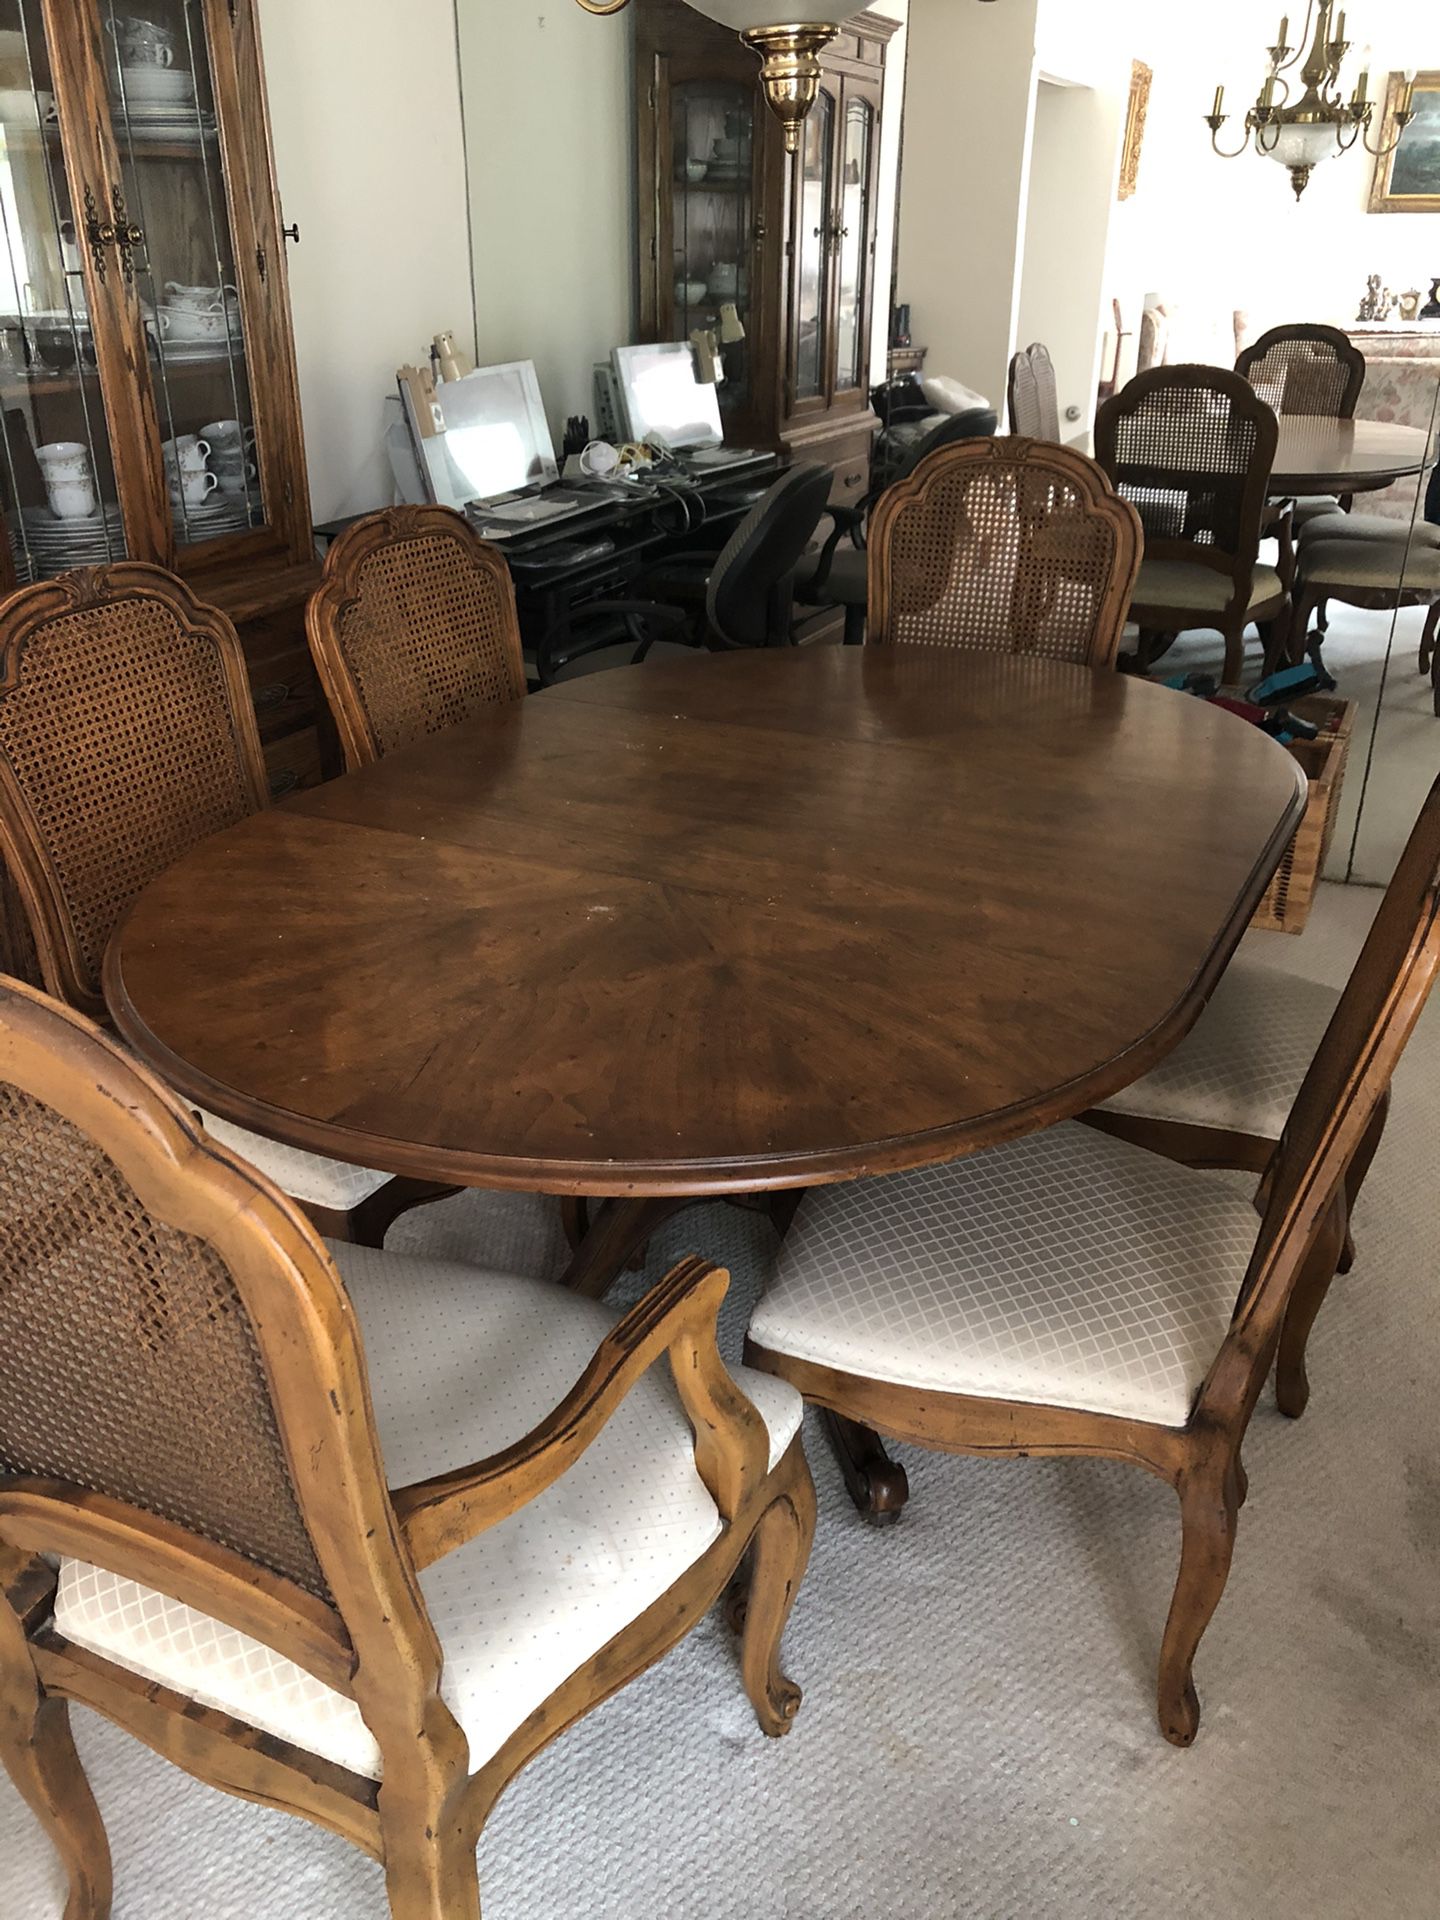 Dining tables and chairs, small kitchen table with chairs